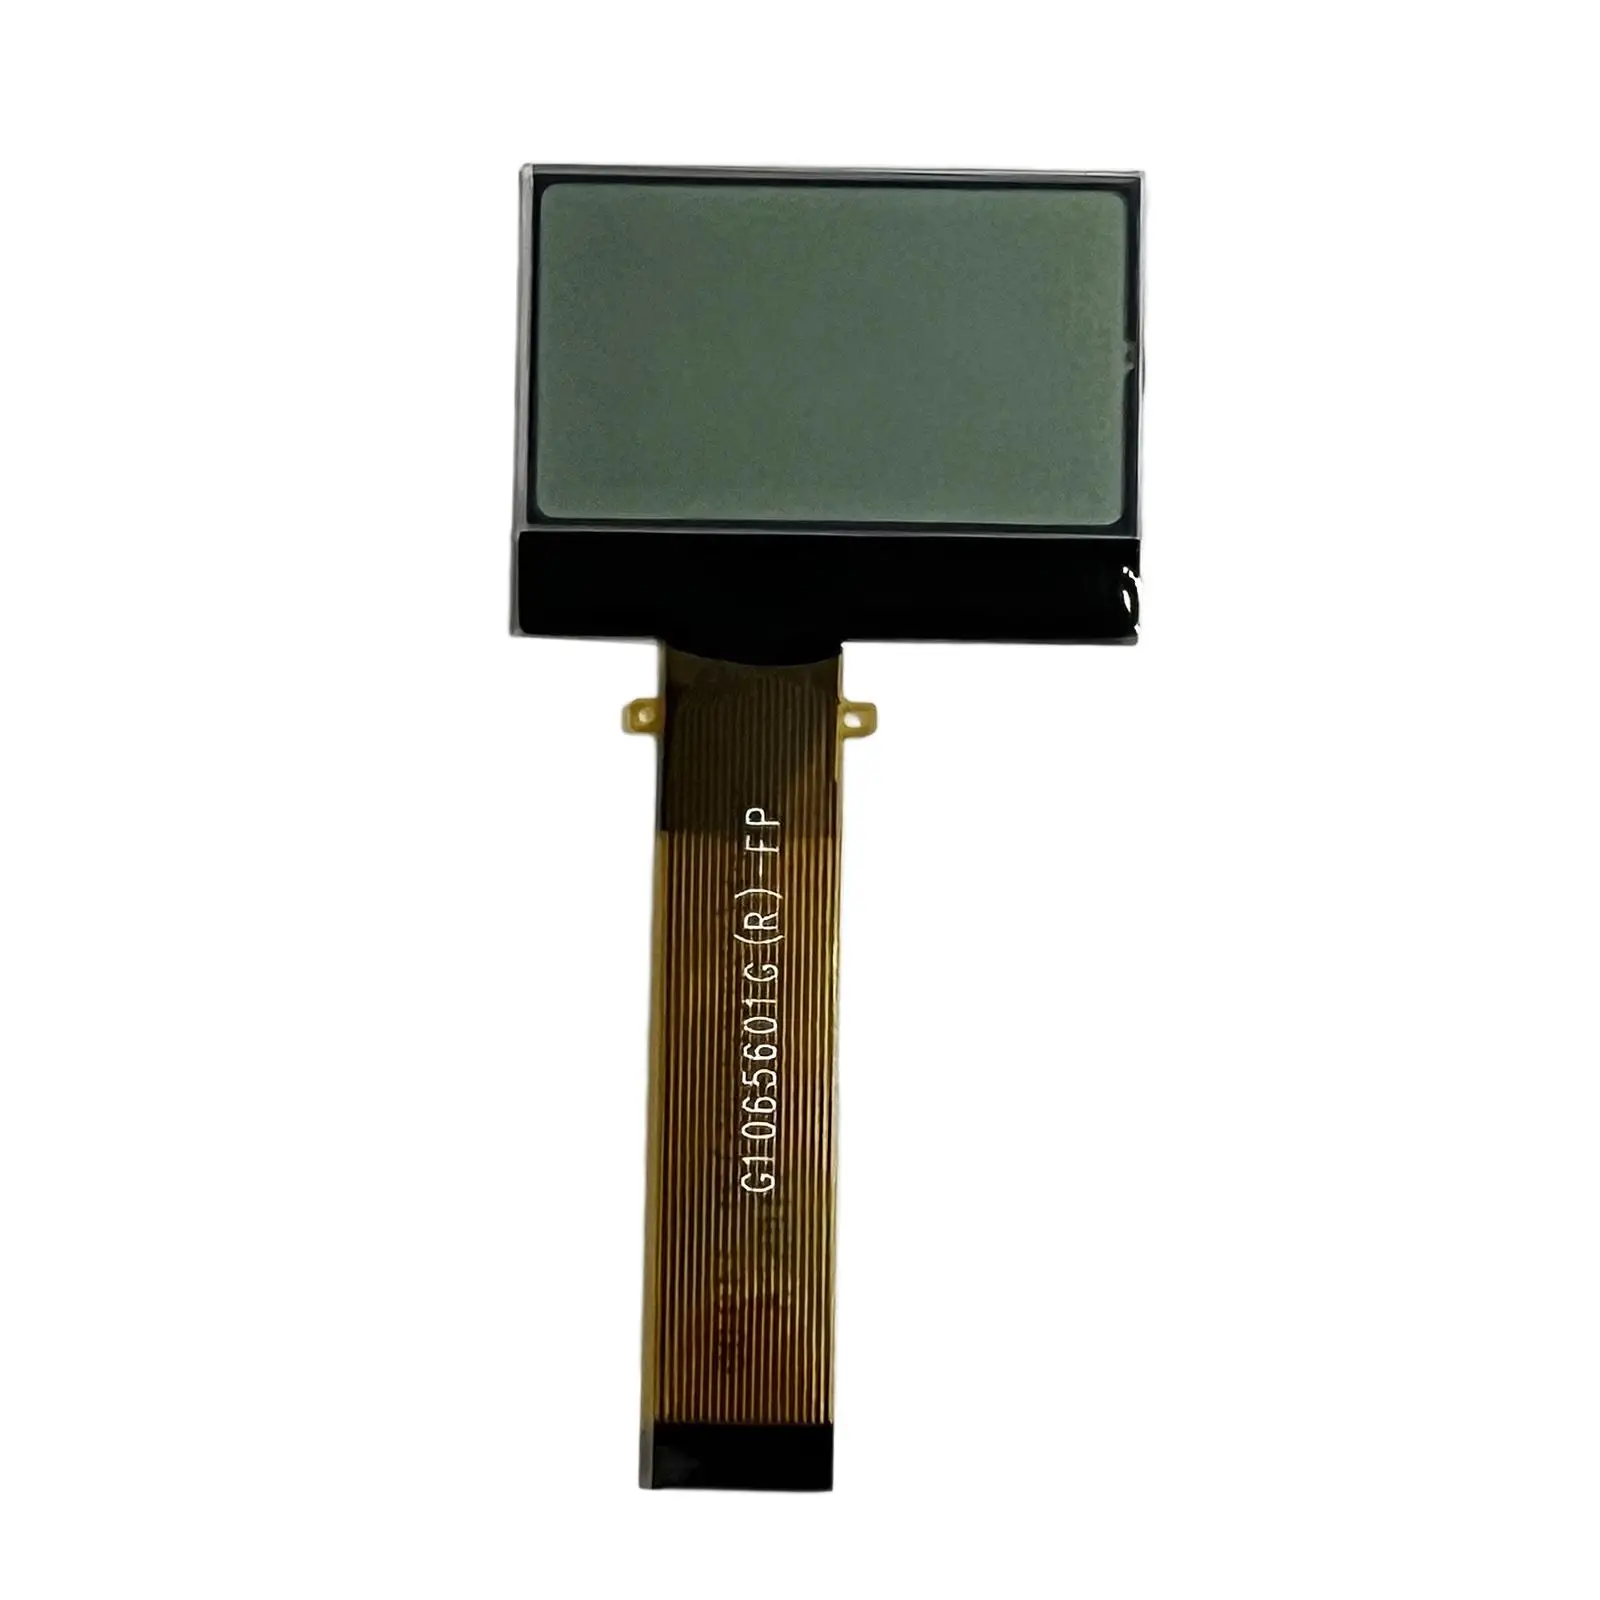 LCD Screen Easy Installation for Volvo Penta Tractor Boat Tachometer